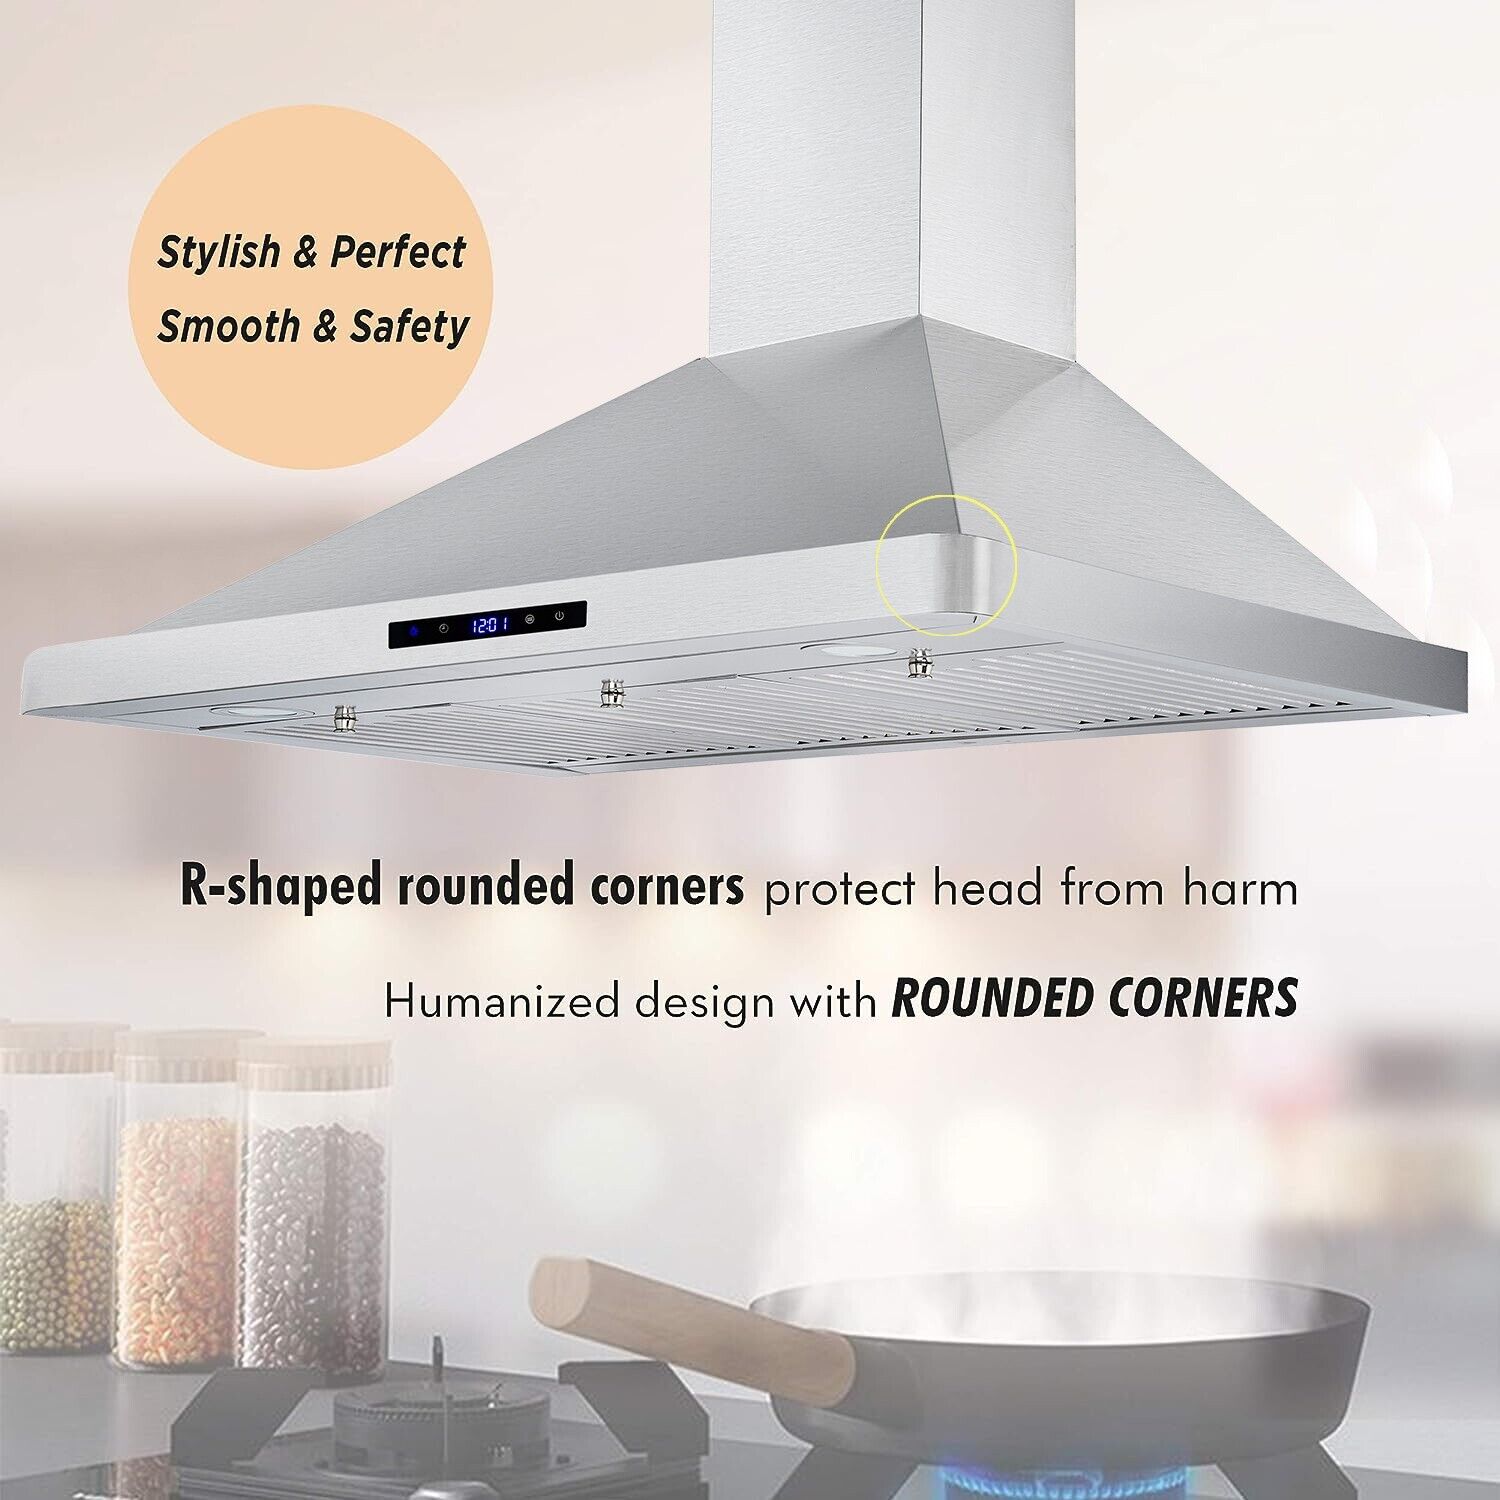 Tieasy 36in Wall Mount Hood Stainless Steel Kitchen Stove Vent 700CFM 3-Speed Fan - 1090 Range Hood USGD1090(Ducted)